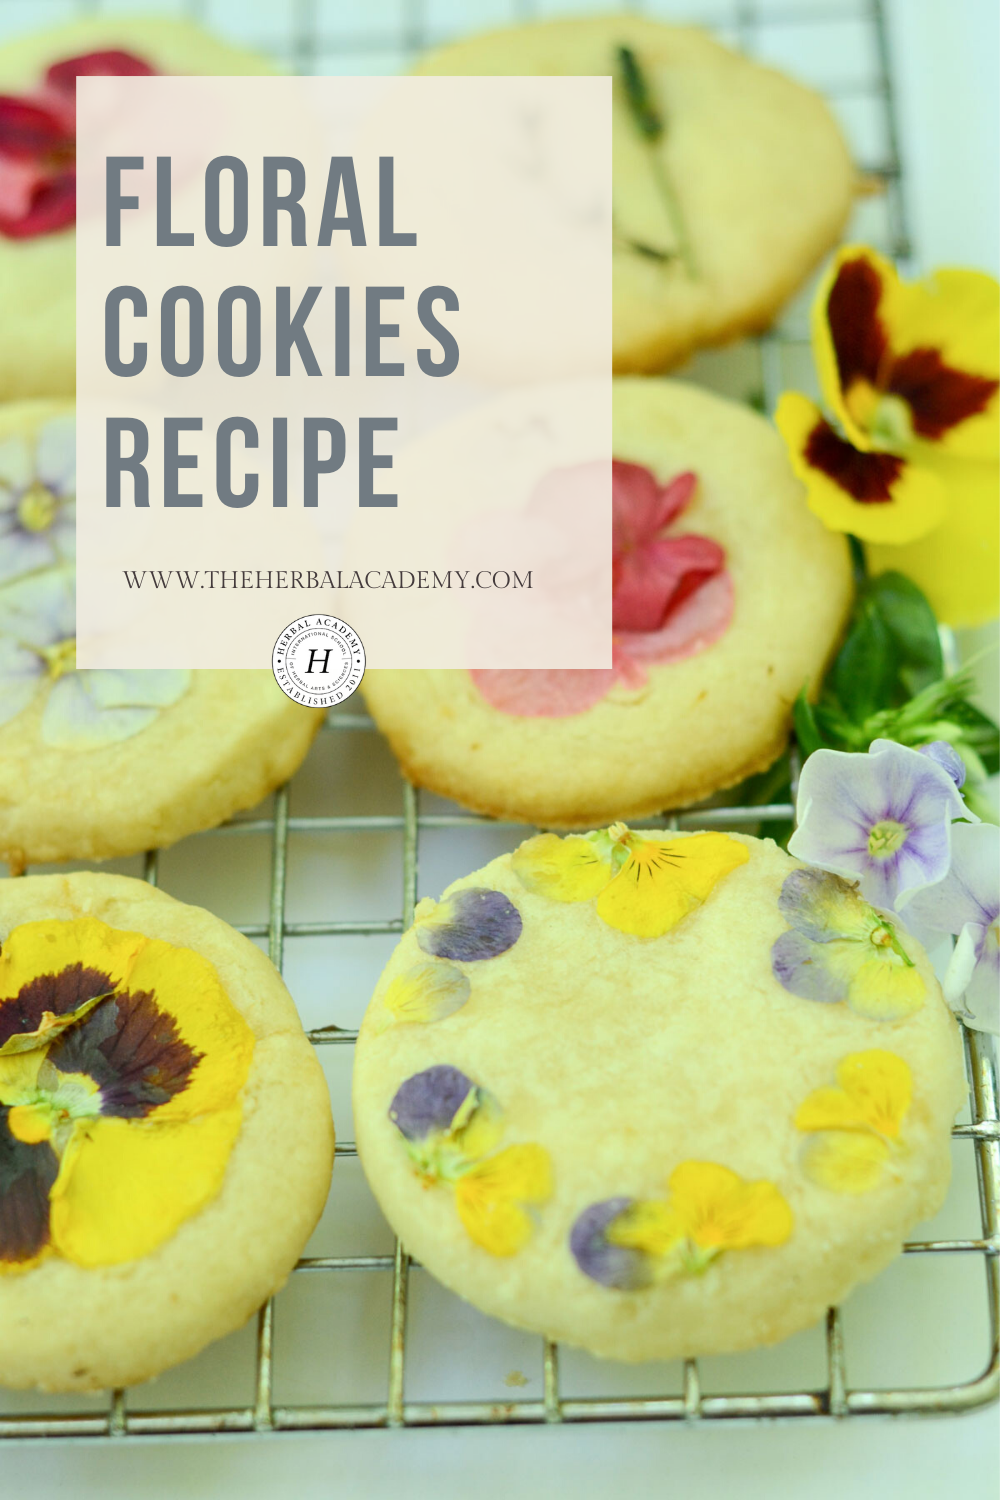 Floral Cookies to Celebrate the Summer Solstice (+Video!) | Herbal Academy | There are many ways to celebrate the summer solstice, including lighting a candle, spending time outdoors, and baking homemade floral cookies.